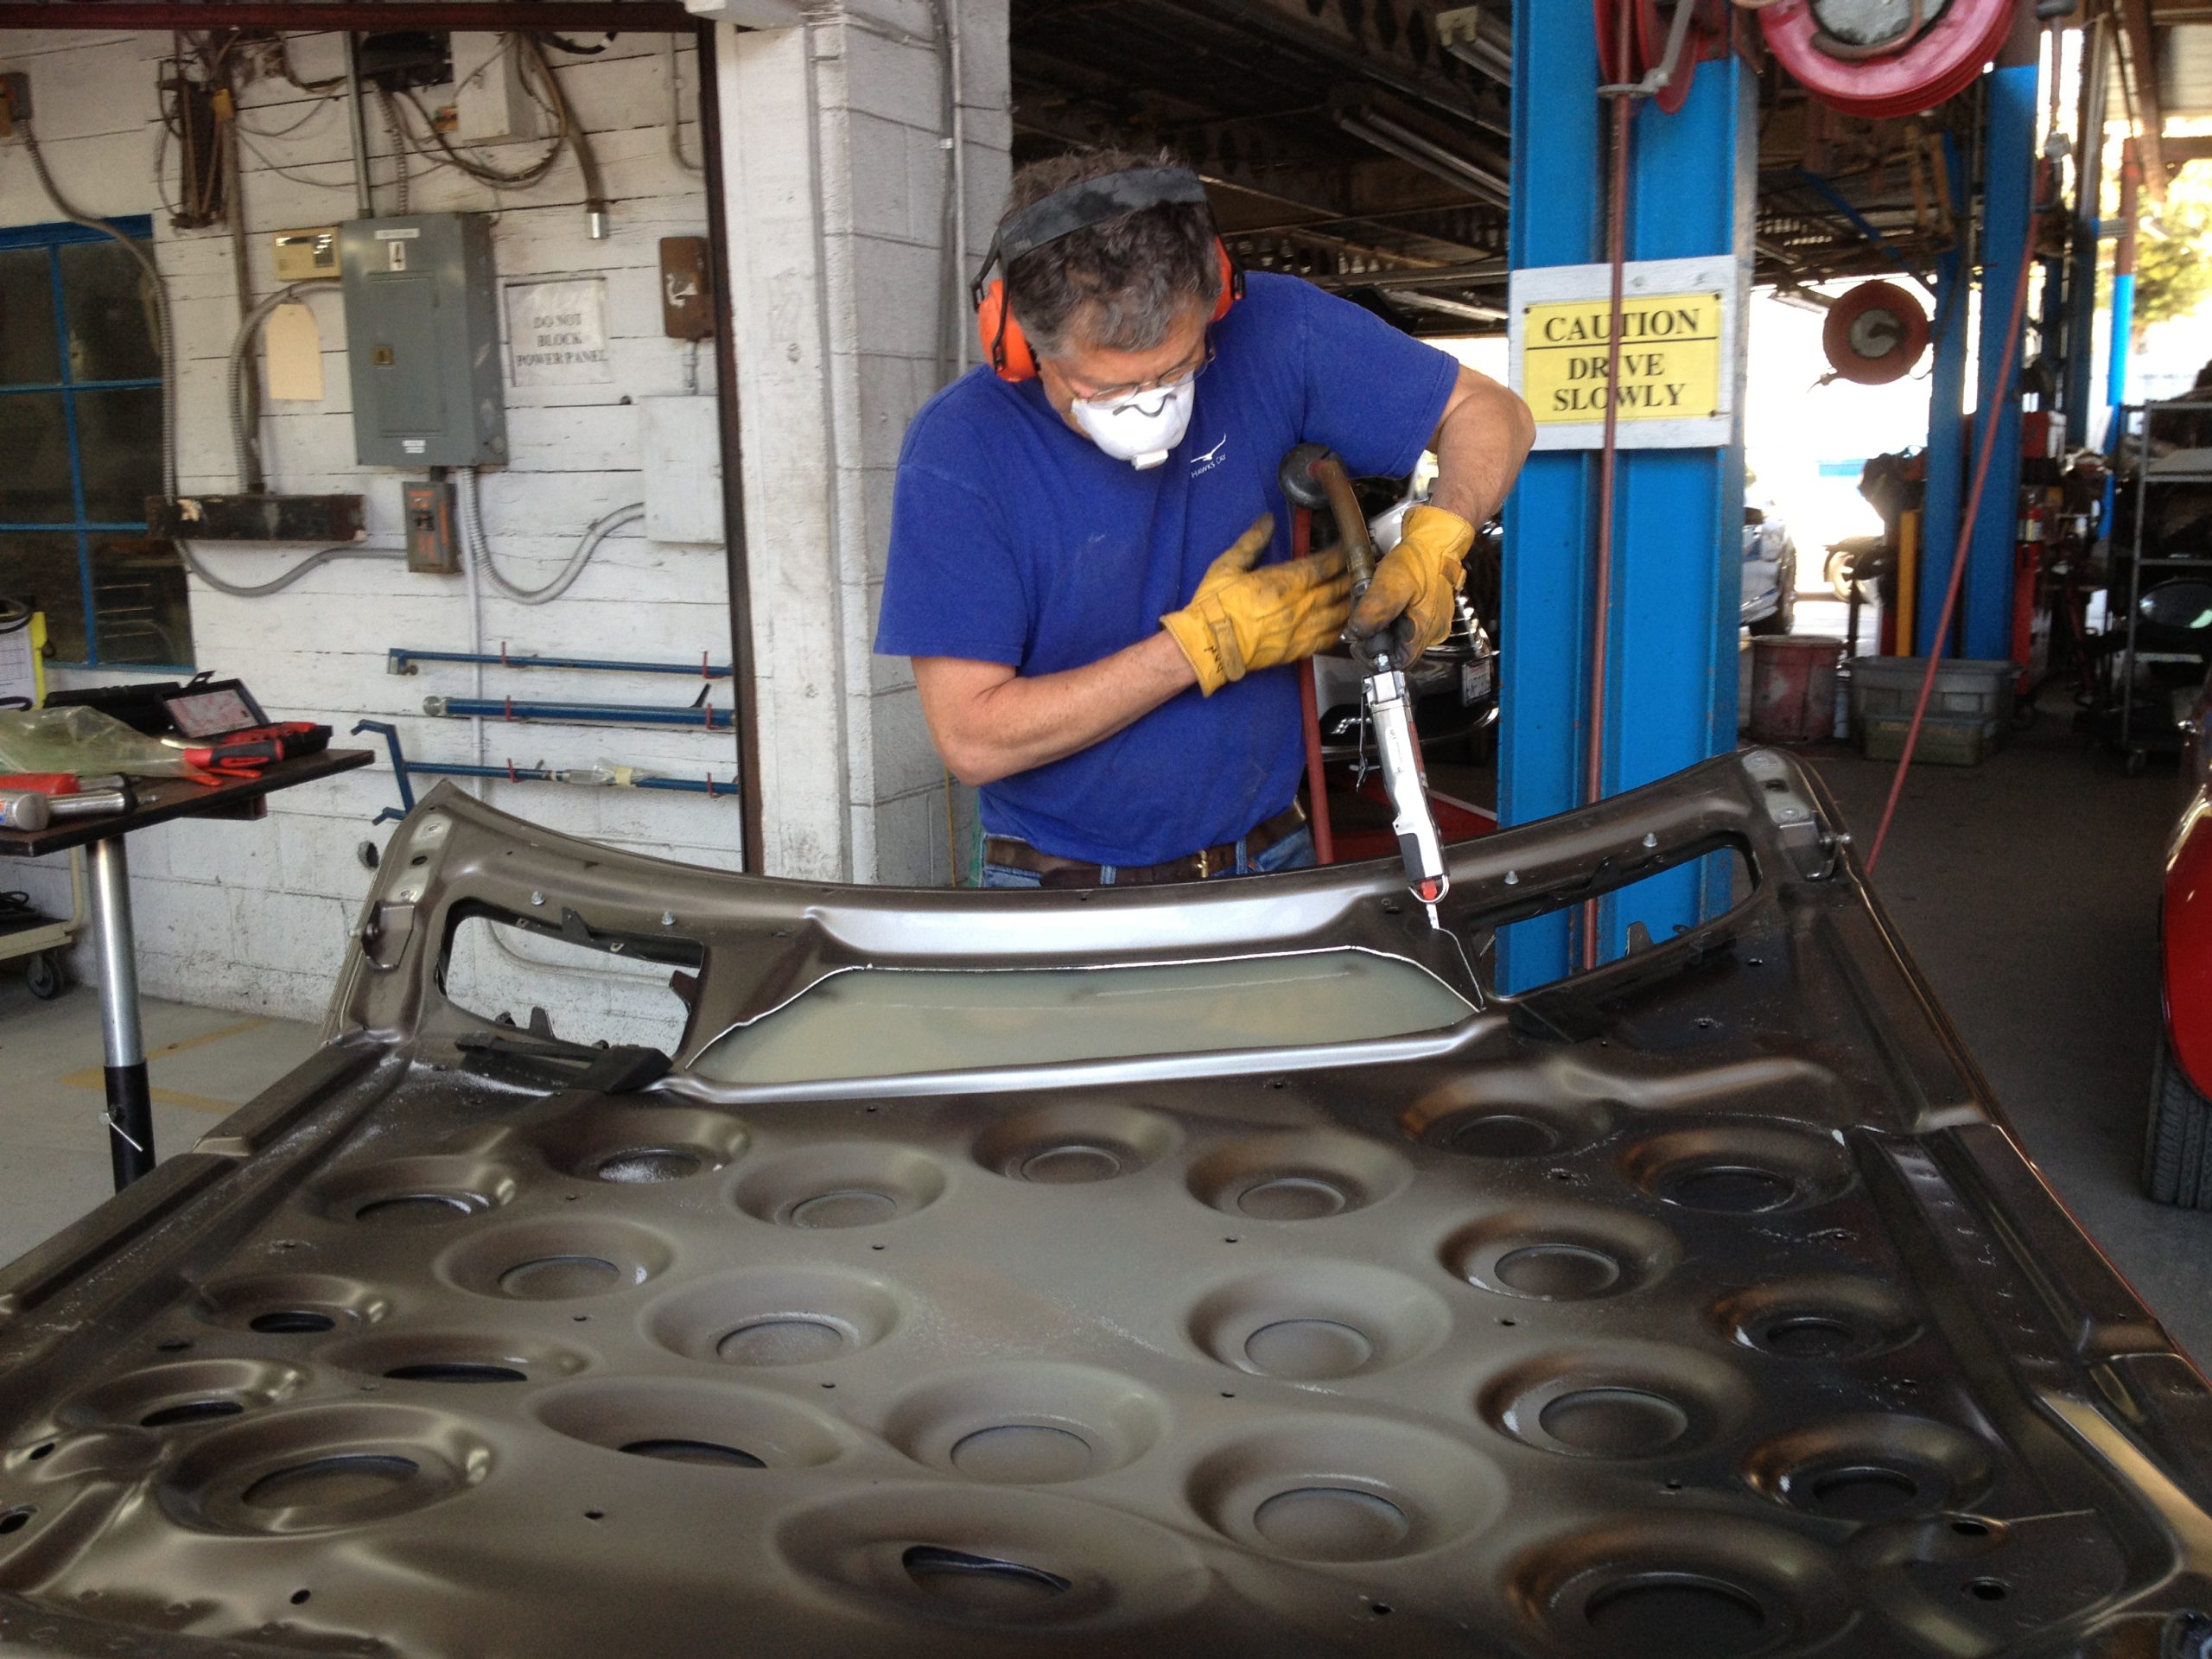 Photo of Dan Schimpke cutting up a vehicle panel to make jewelry for CRASH.